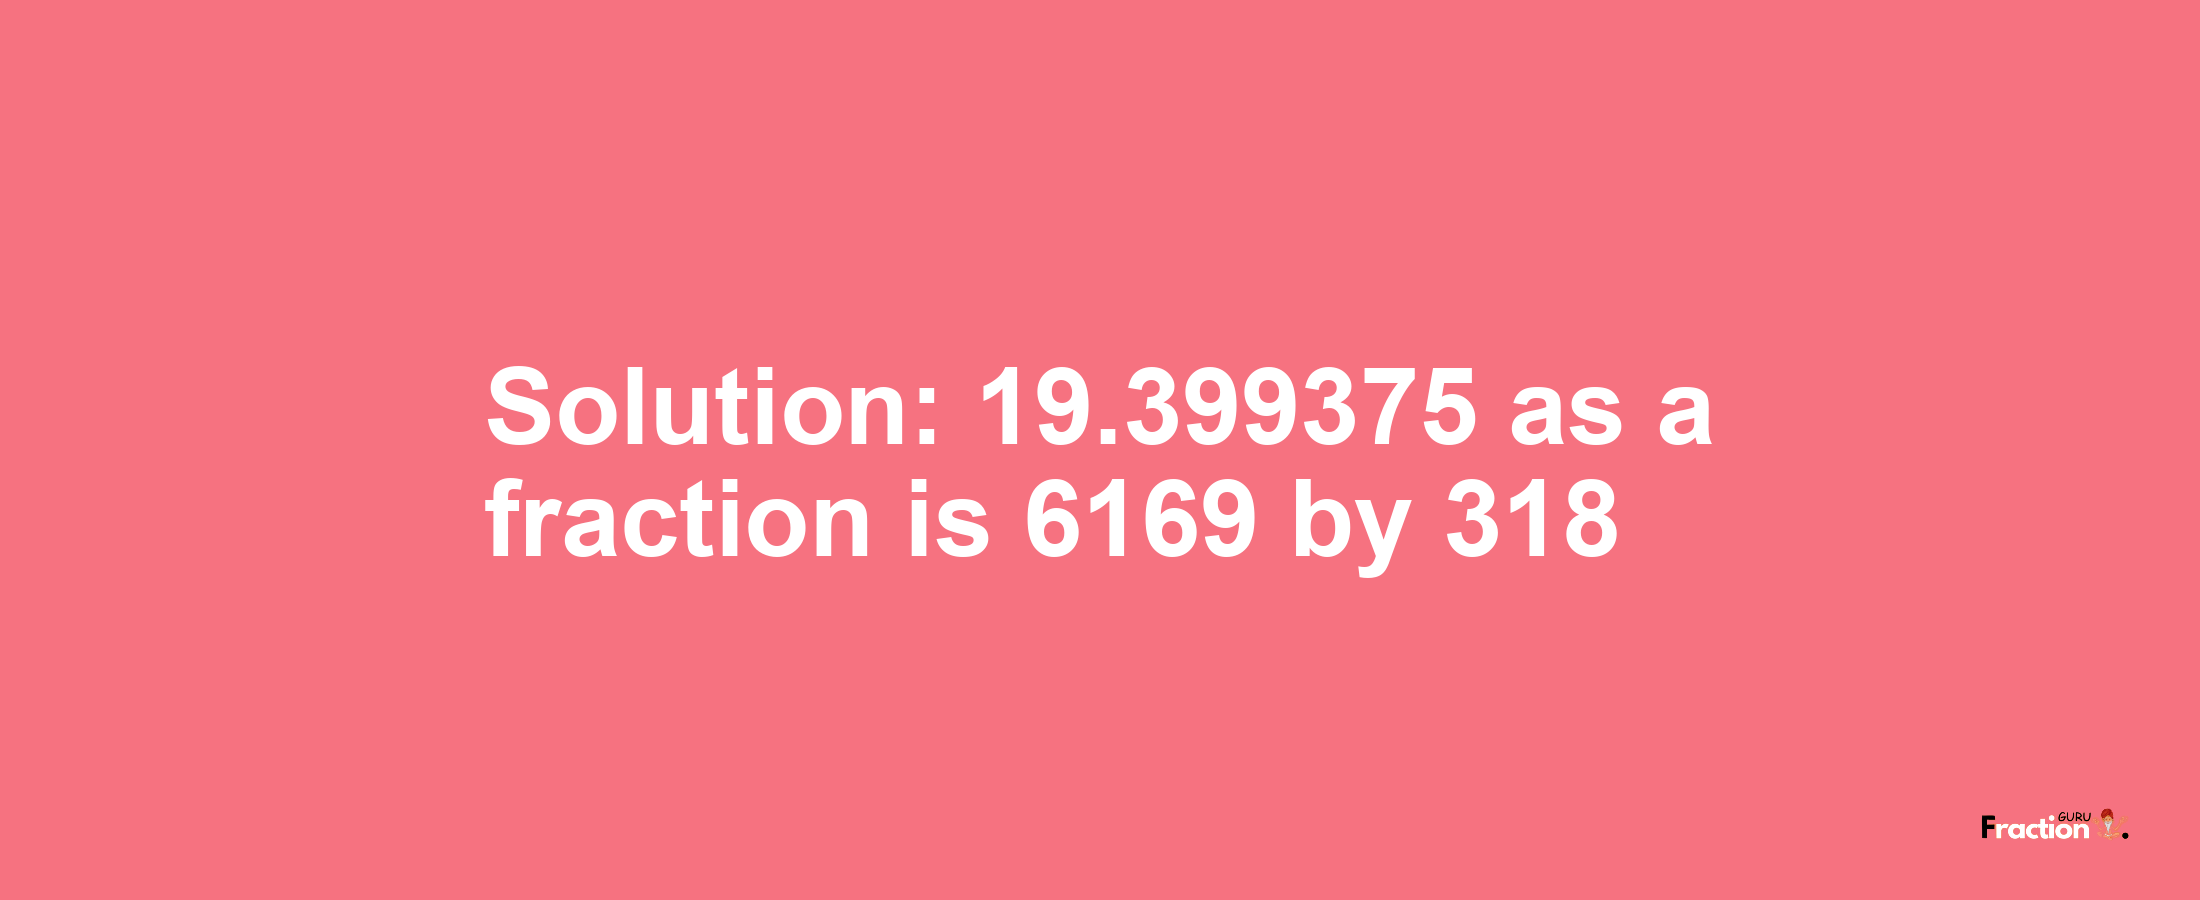 Solution:19.399375 as a fraction is 6169/318